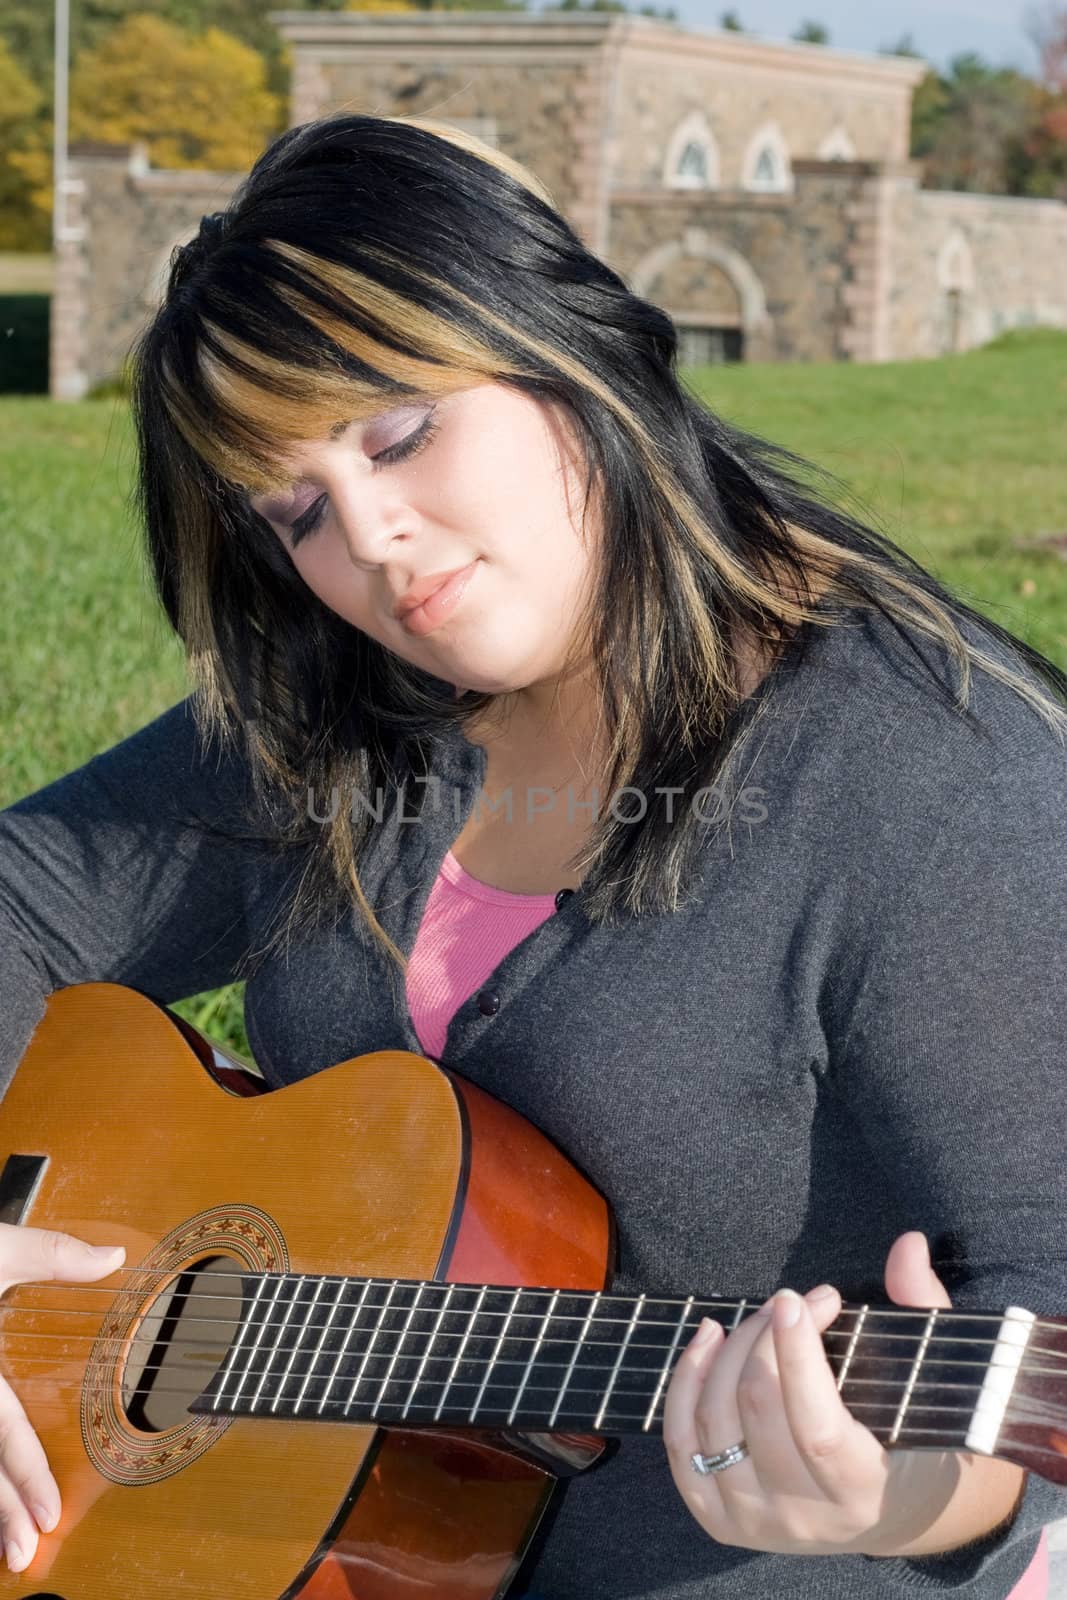 A young hispanic woman playing a guitar while sitting on a blanket in the green grass. Her hair is highlighted with blonde streaks.